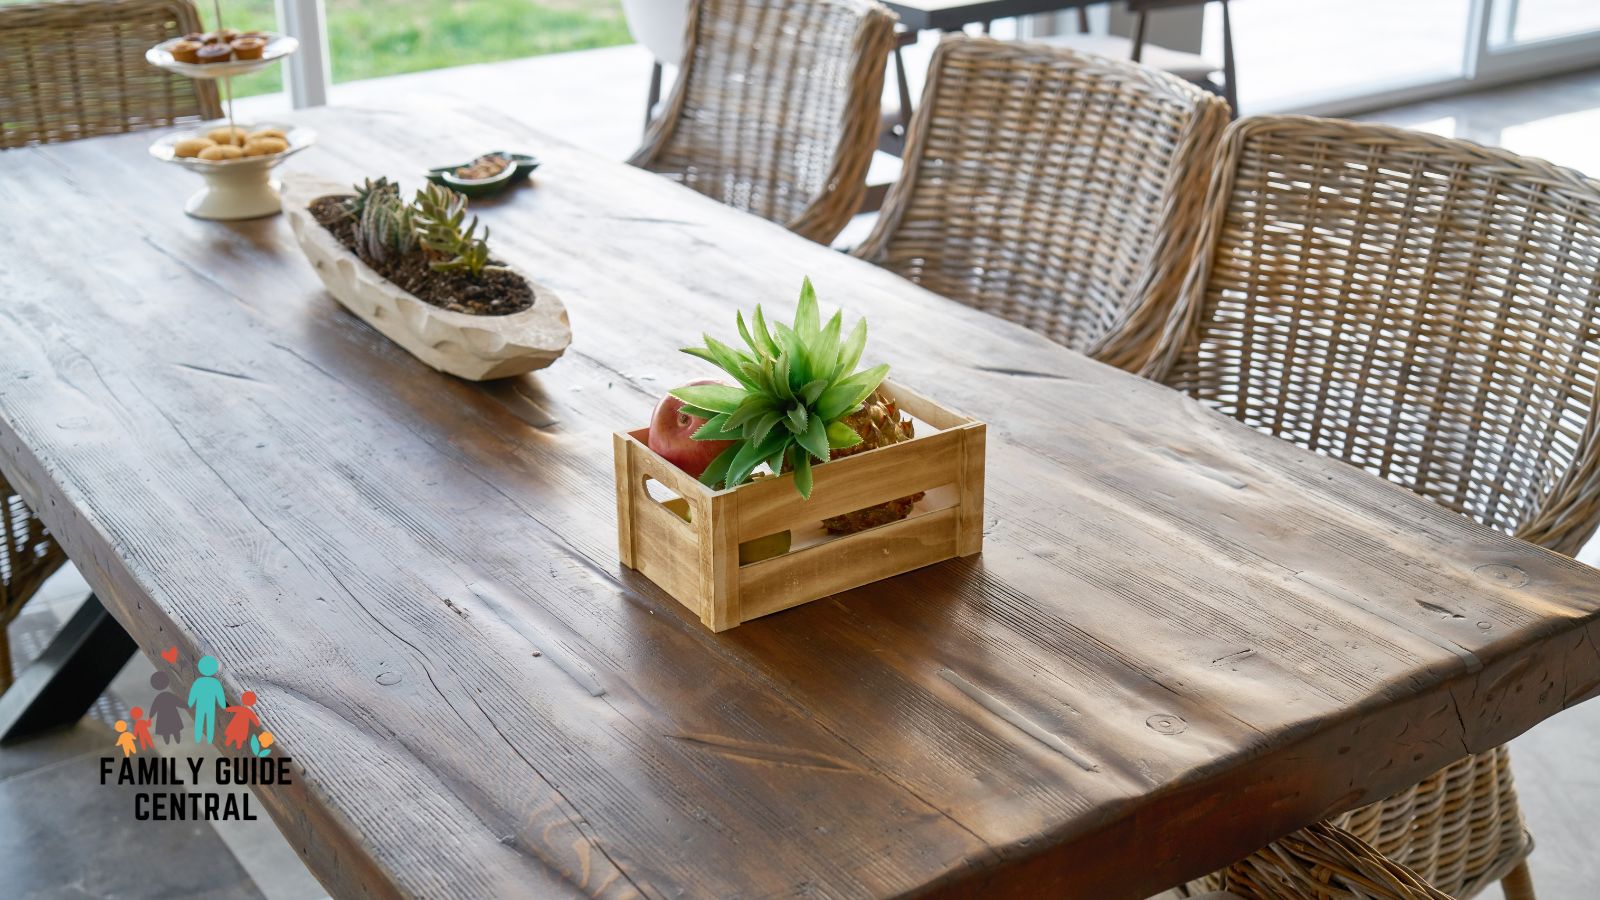 Picture of a really nice table - familyguidecentral.com